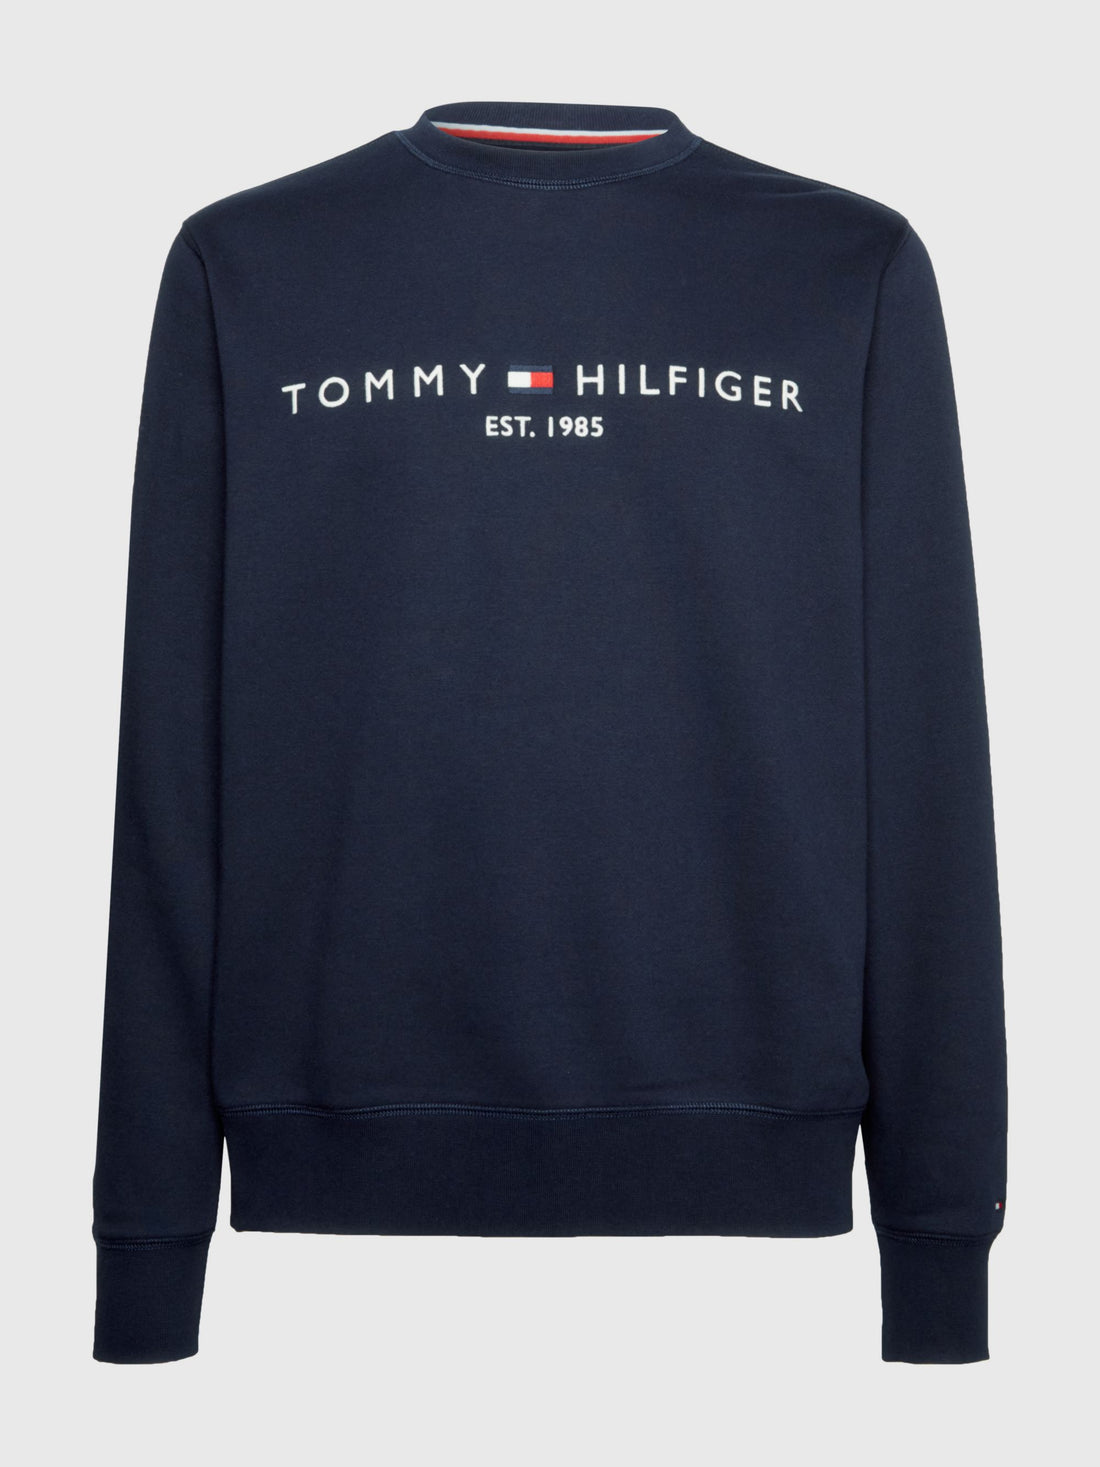 Sweatshirt with embroidered logo - Tommy Hilfiger